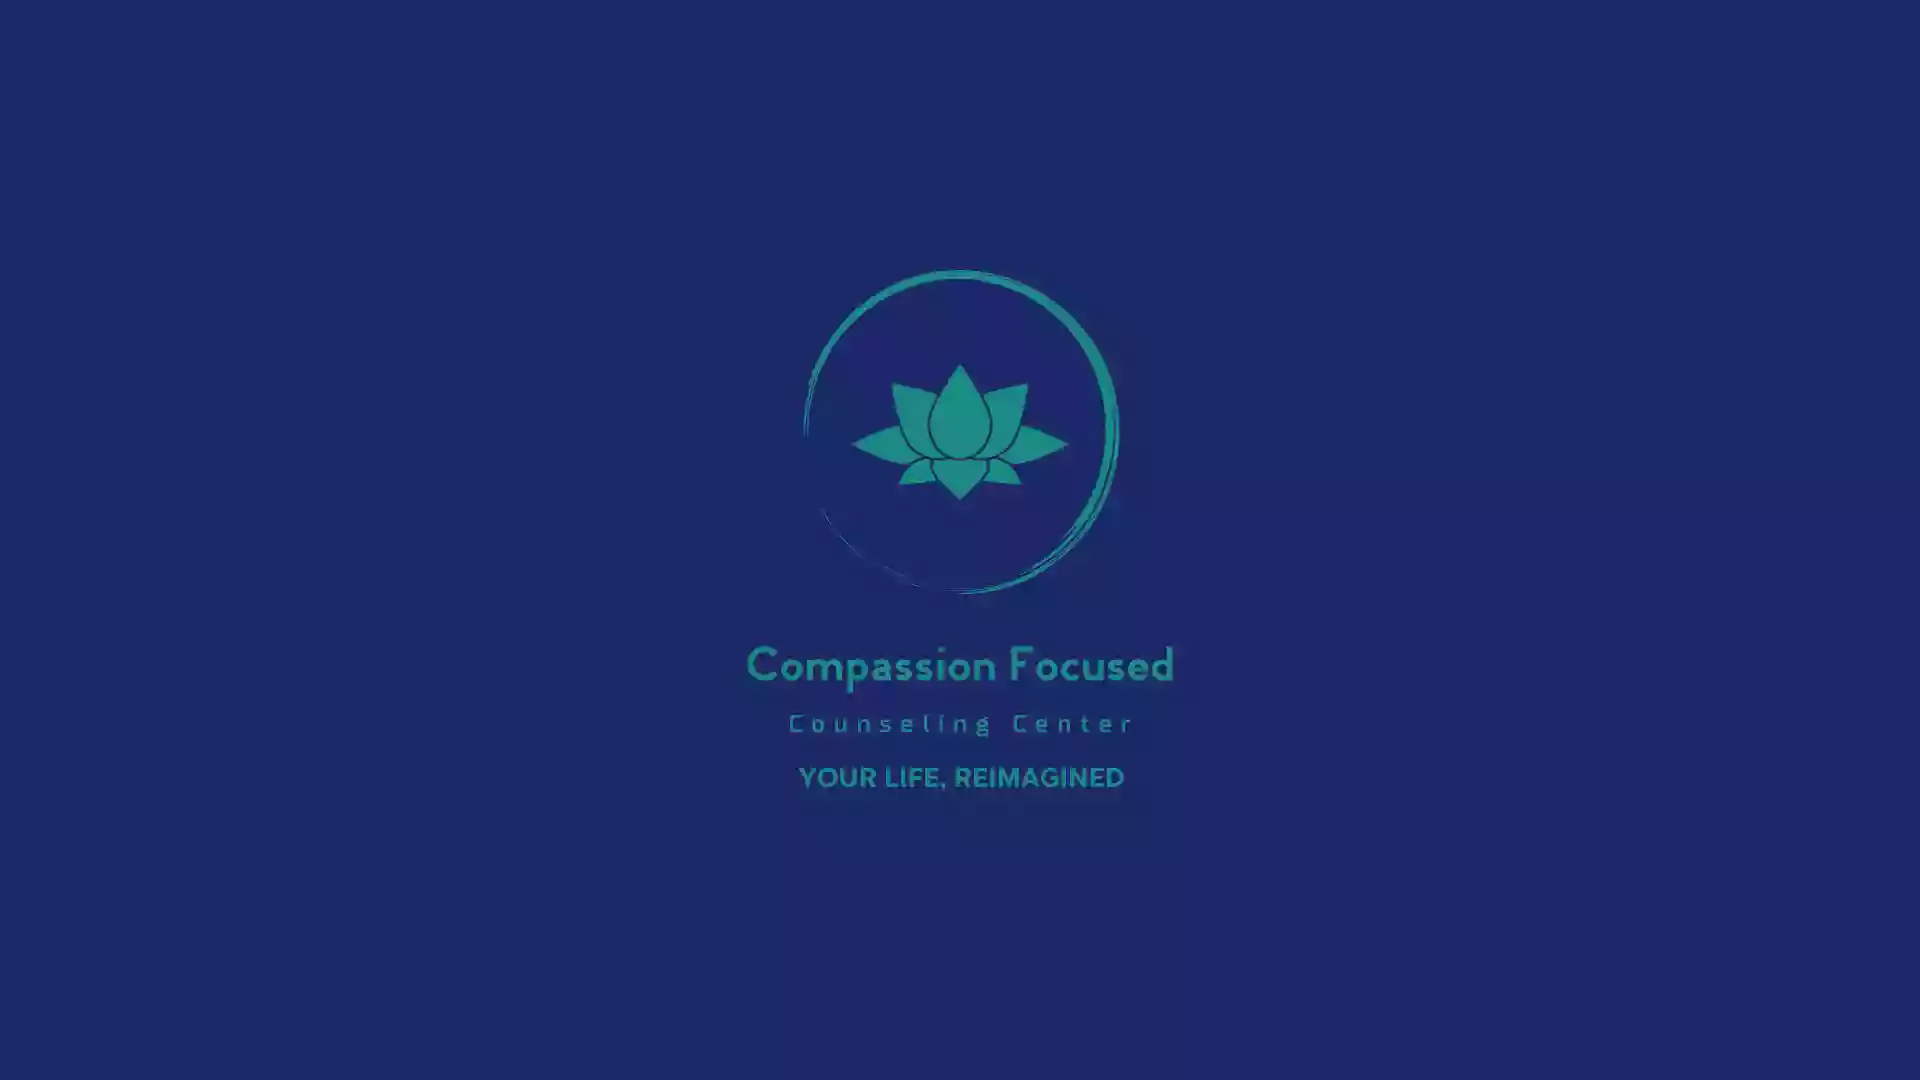 Compassion Focused Counseling Center, LLC